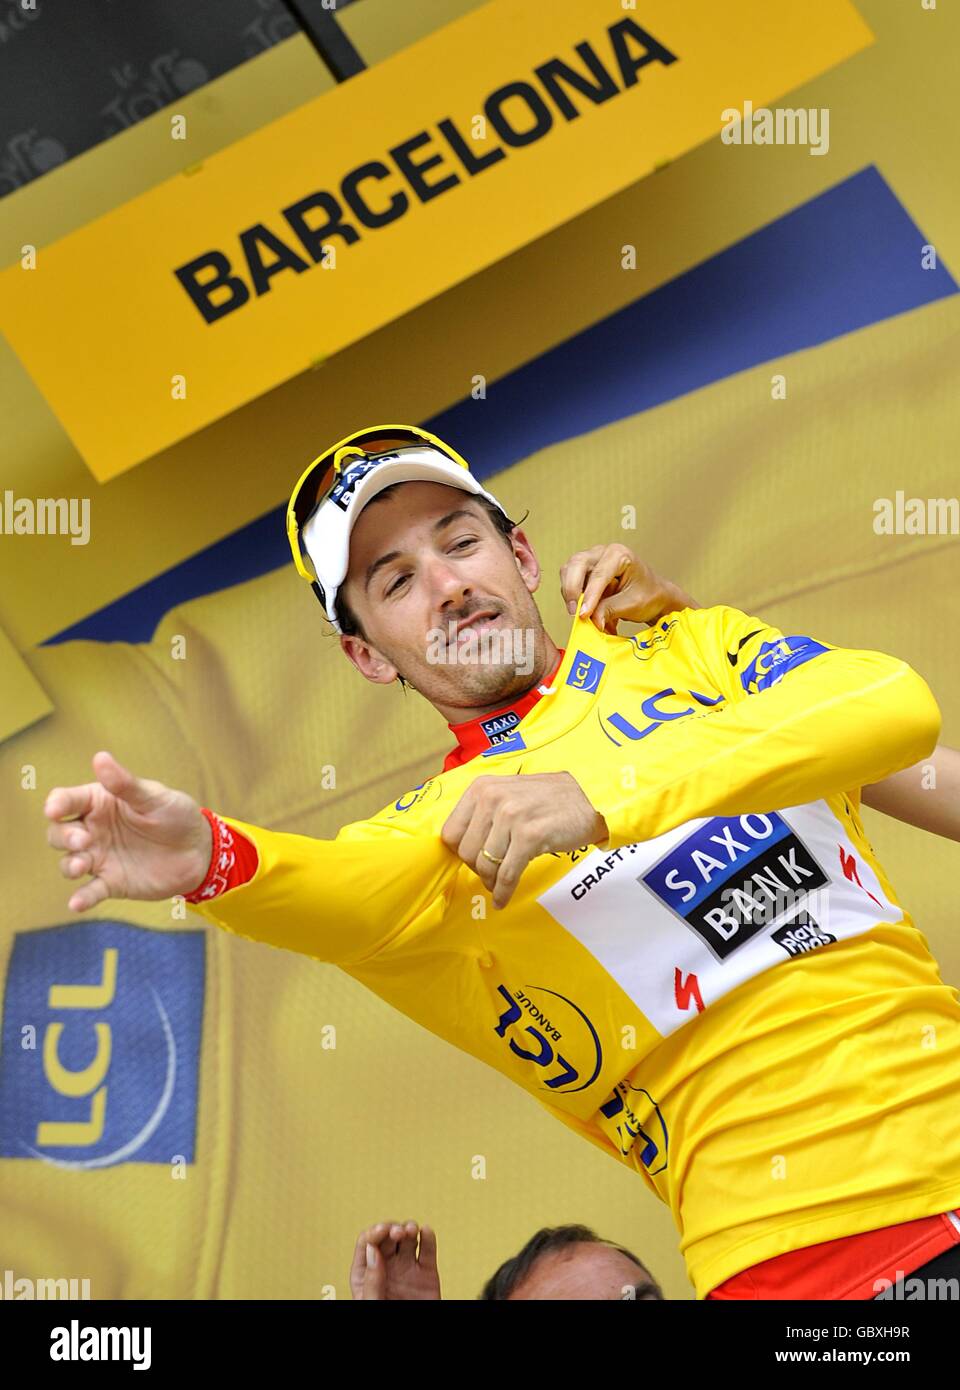 Team Saxo Bank's Fabian Cancellara wearing the yellow jersey on the podium  after the sixth stage of the Tour de France between Gerone and Barcelona  Stock Photo - Alamy